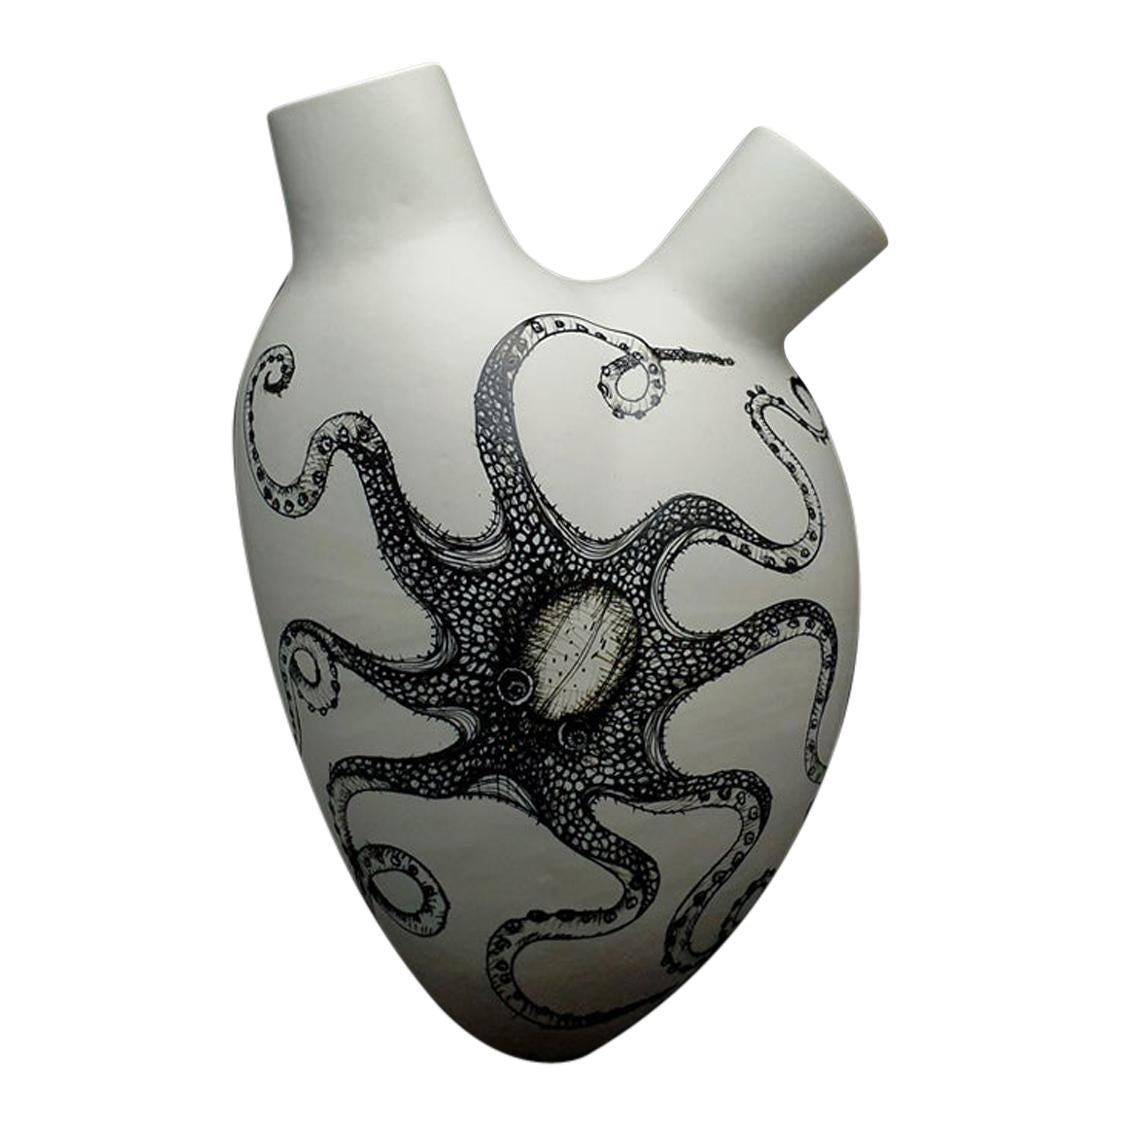 Luxury Vase #57 "Octopus". Porcelain. Handmade design and crafted in Italy. 2020 For Sale